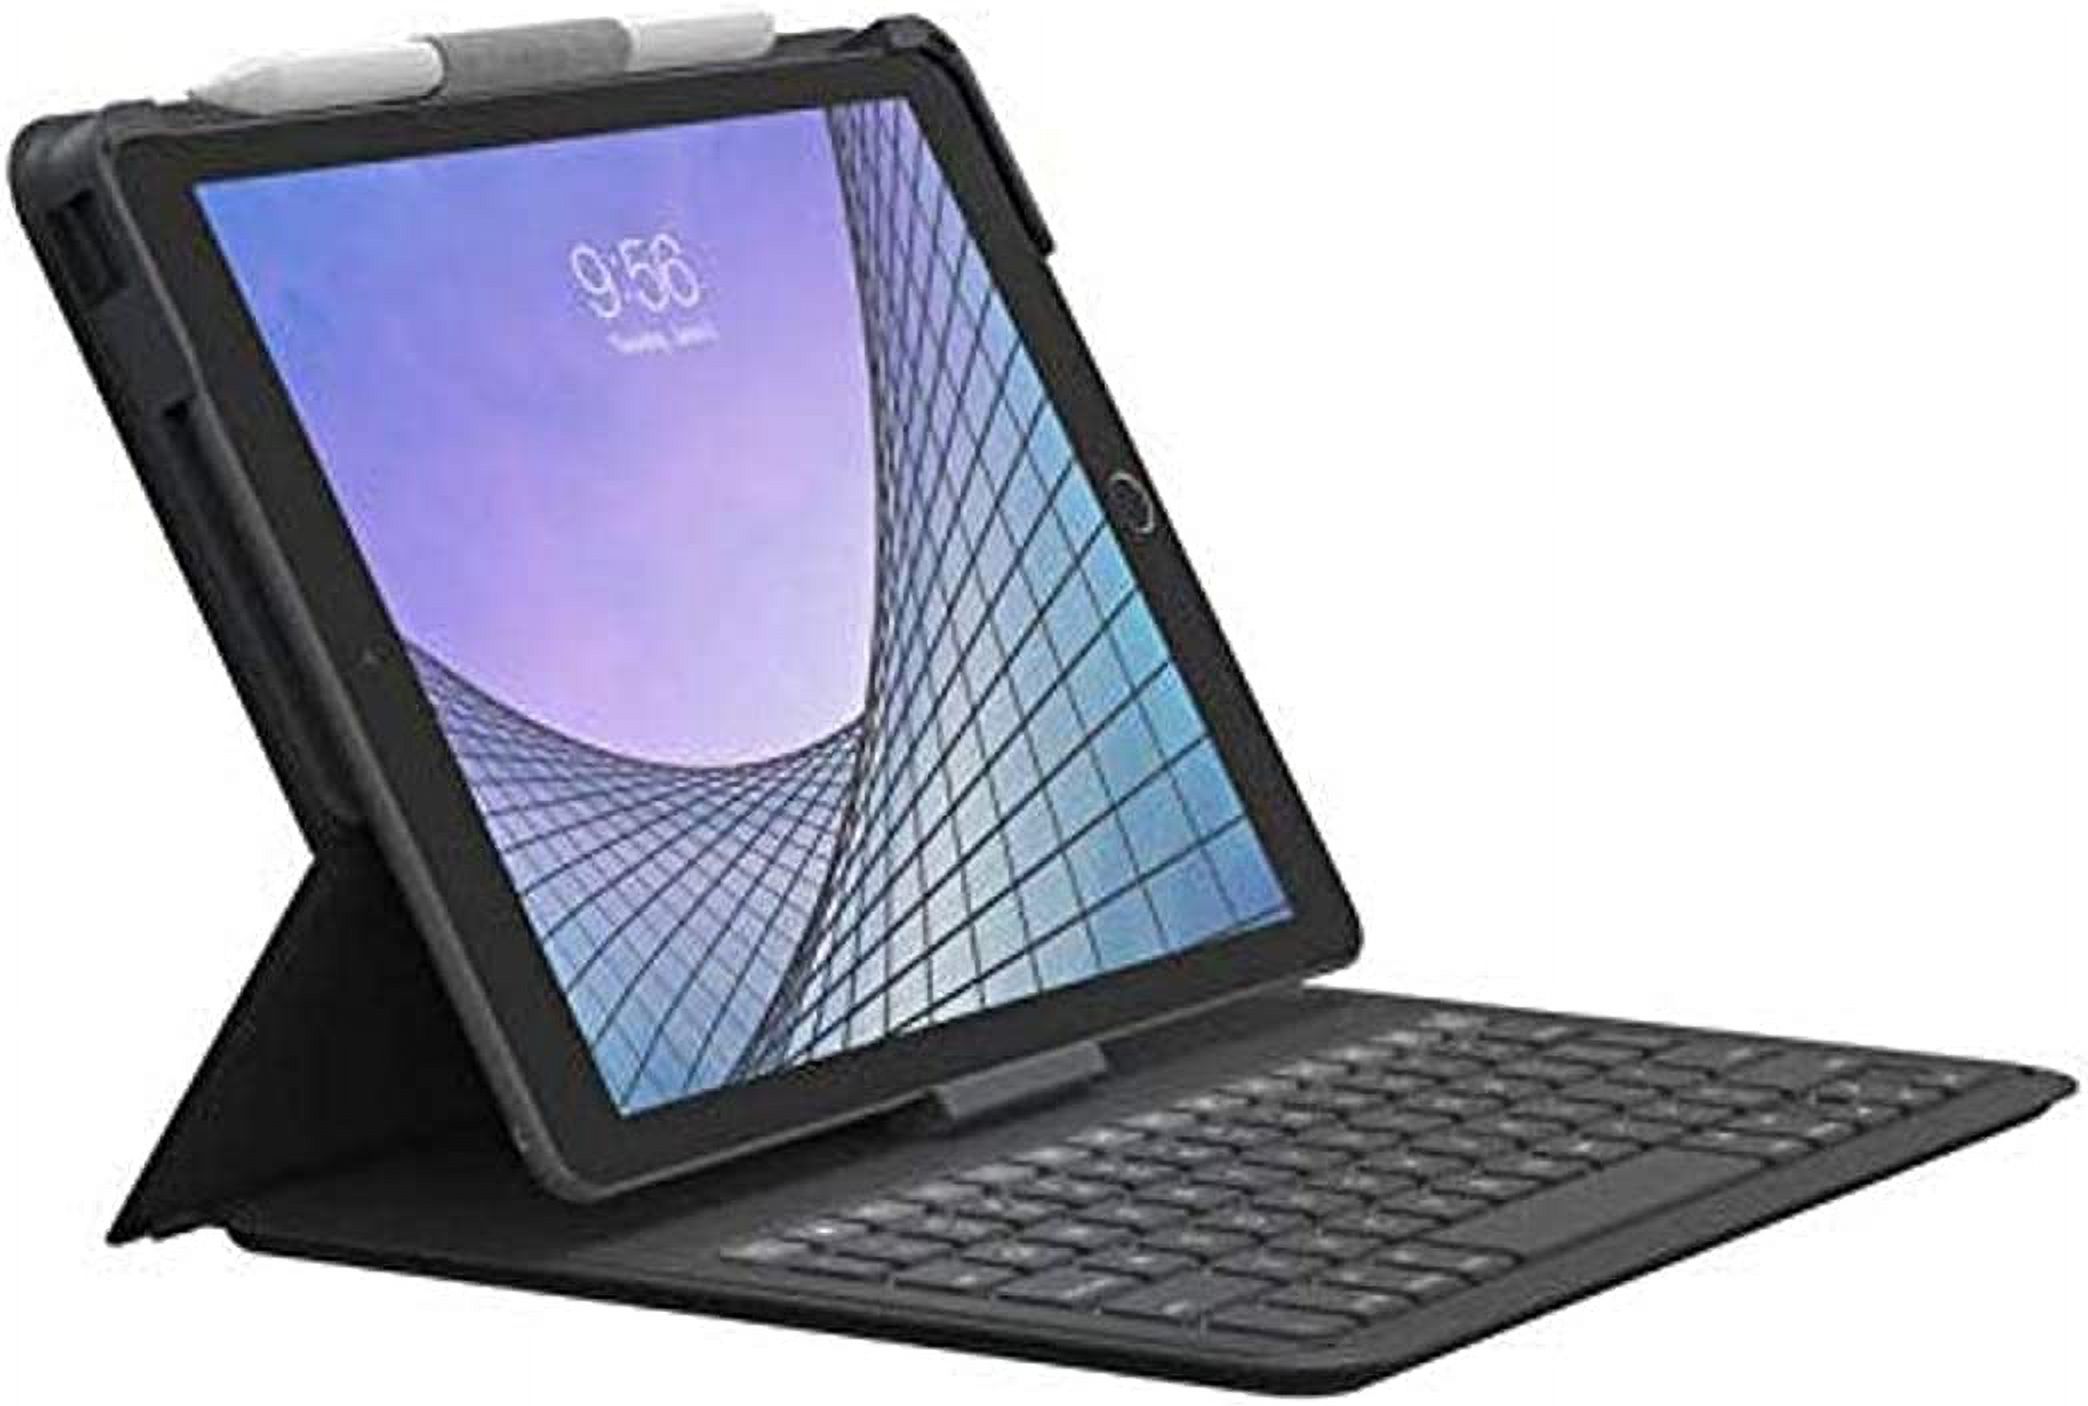 ZAGG - Messenger Folio 2 - Tablet Keyboard & Case for 10.2-inch iPad, 10.5-inch iPad/Air 3 - image 2 of 9